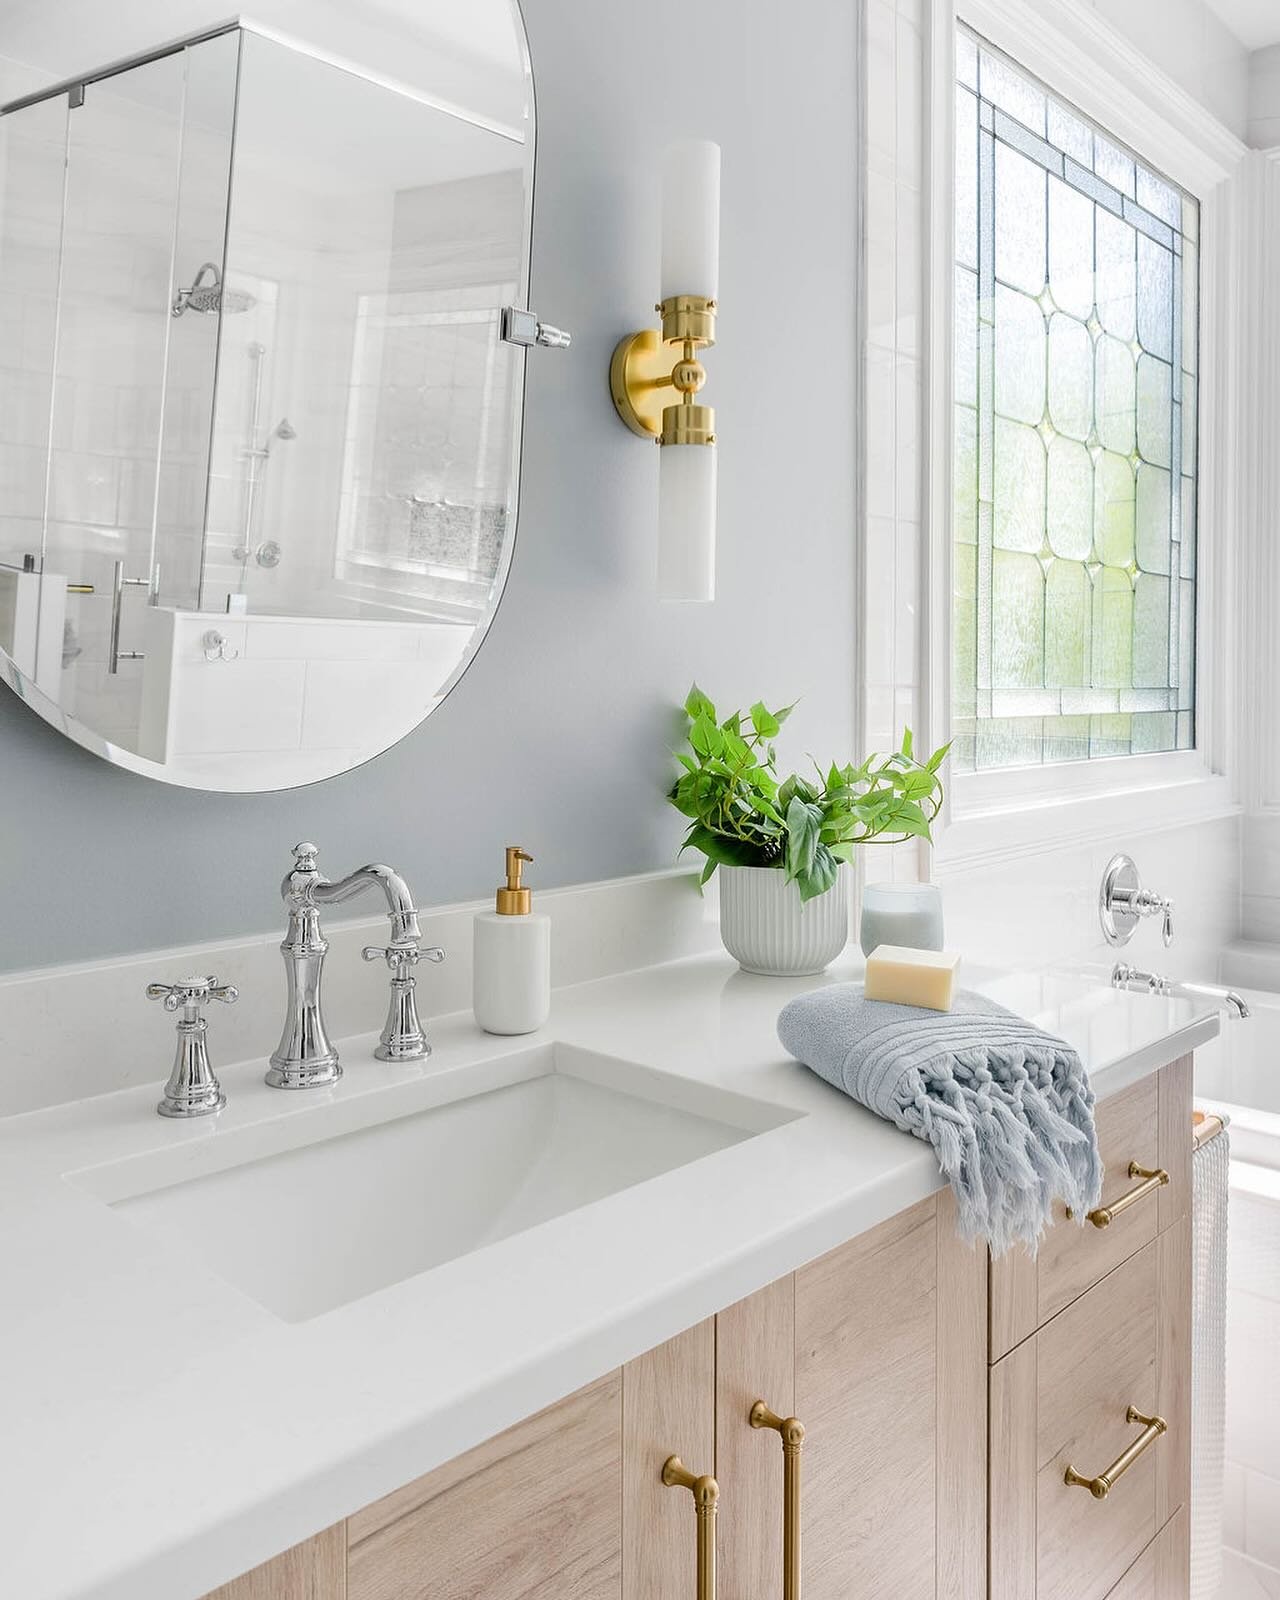 We contrasted this beautiful dolomite tiled wall with @sherwinwilliams Mineral, a gray blue paint, for subtle coastal vibes in this primary bath. 

📸 @sma.photography.nc 
🛠️ @wakeremodeling 
.
.
.
.
.
.
.
@serenaandlily @rejuvenation @moeninc #moen